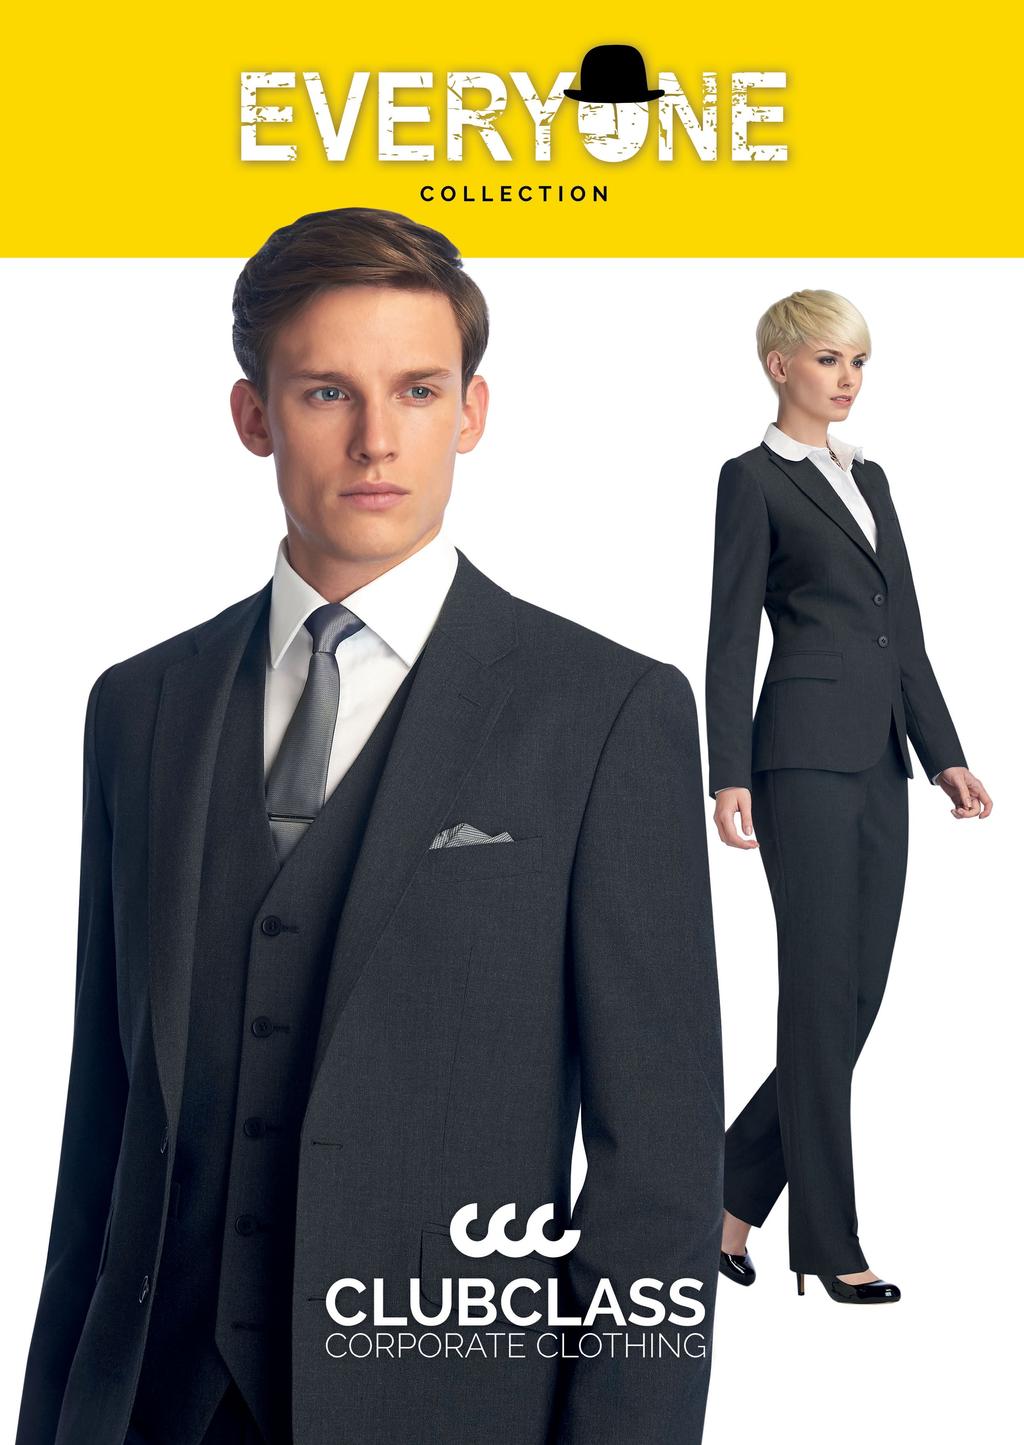 We have a 40 year track record in supplying tailored clothing and currently manufacture over 2.